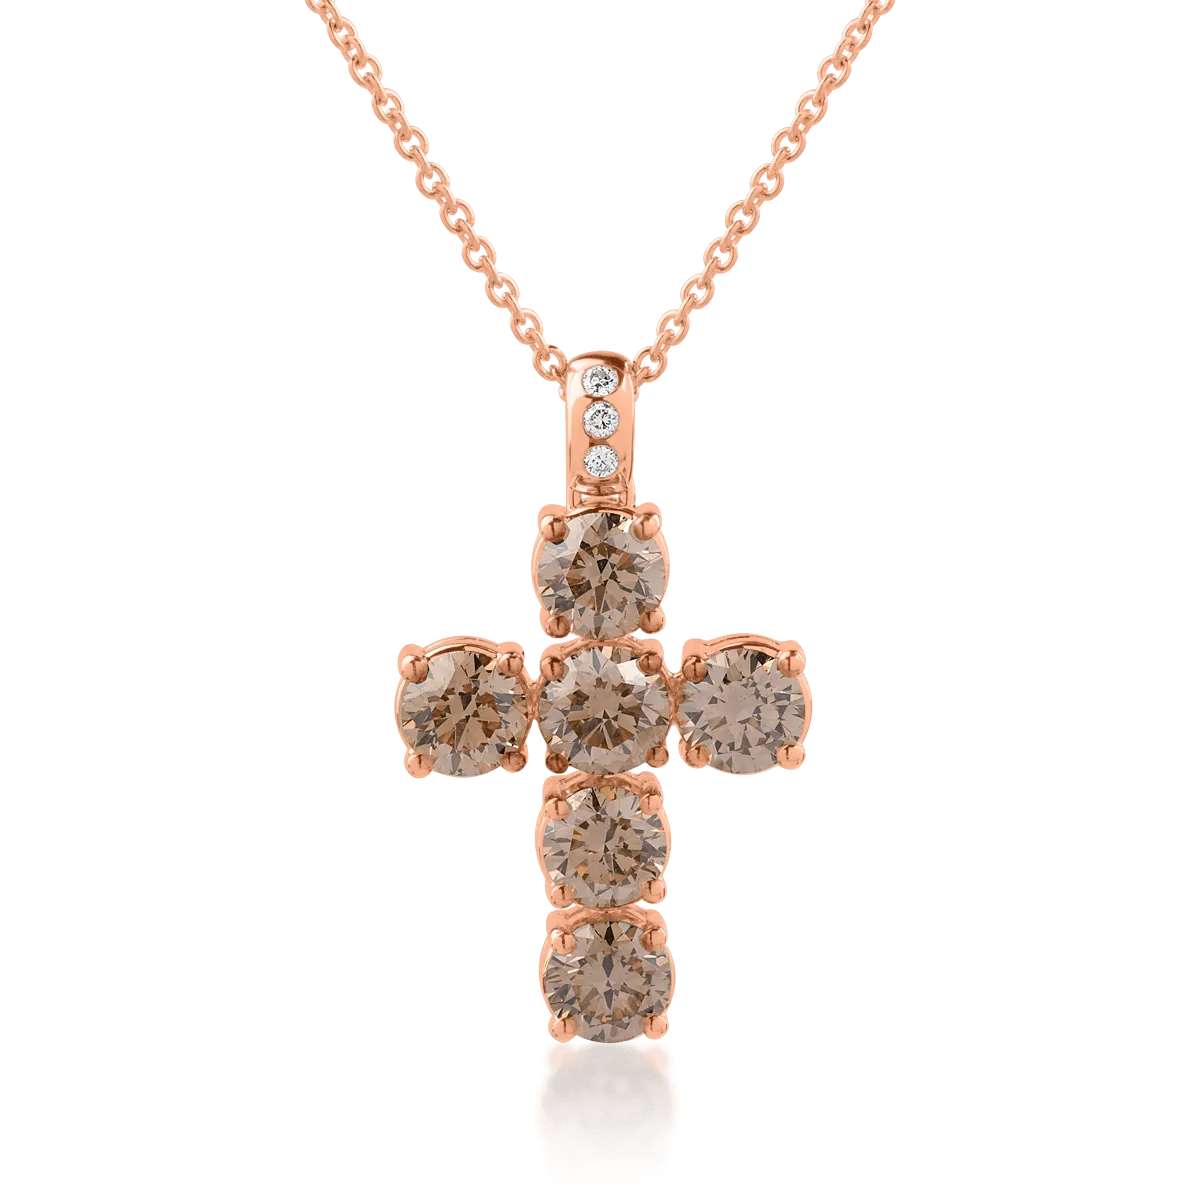 18K rose gold chain with pendant with brown diamonds of3.85ct and diamonds of 0.04ct